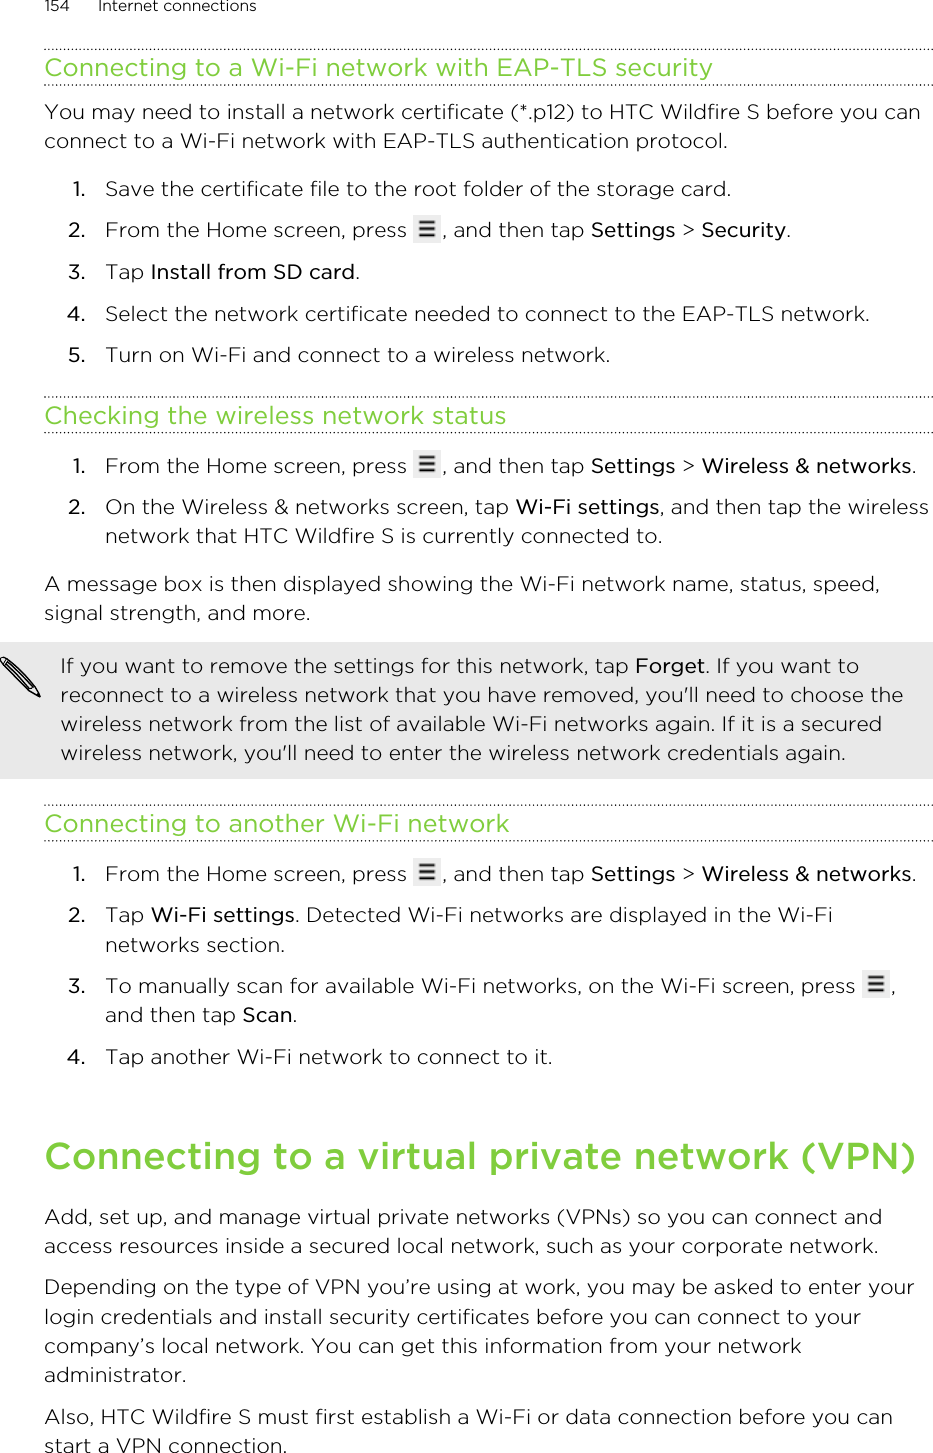 Connecting to a Wi-Fi network with EAP-TLS securityYou may need to install a network certificate (*.p12) to HTC Wildfire S before you canconnect to a Wi-Fi network with EAP-TLS authentication protocol.1. Save the certificate file to the root folder of the storage card.2. From the Home screen, press  , and then tap Settings &gt; Security.3. Tap Install from SD card.4. Select the network certificate needed to connect to the EAP-TLS network.5. Turn on Wi-Fi and connect to a wireless network.Checking the wireless network status1. From the Home screen, press  , and then tap Settings &gt; Wireless &amp; networks.2. On the Wireless &amp; networks screen, tap Wi-Fi settings, and then tap the wirelessnetwork that HTC Wildfire S is currently connected to.A message box is then displayed showing the Wi-Fi network name, status, speed,signal strength, and more.If you want to remove the settings for this network, tap Forget. If you want toreconnect to a wireless network that you have removed, you&apos;ll need to choose thewireless network from the list of available Wi-Fi networks again. If it is a securedwireless network, you&apos;ll need to enter the wireless network credentials again.Connecting to another Wi-Fi network1. From the Home screen, press  , and then tap Settings &gt; Wireless &amp; networks.2. Tap Wi-Fi settings. Detected Wi-Fi networks are displayed in the Wi-Finetworks section.3. To manually scan for available Wi-Fi networks, on the Wi-Fi screen, press  ,and then tap Scan.4. Tap another Wi-Fi network to connect to it.Connecting to a virtual private network (VPN)Add, set up, and manage virtual private networks (VPNs) so you can connect andaccess resources inside a secured local network, such as your corporate network.Depending on the type of VPN you’re using at work, you may be asked to enter yourlogin credentials and install security certificates before you can connect to yourcompany’s local network. You can get this information from your networkadministrator.Also, HTC Wildfire S must first establish a Wi-Fi or data connection before you canstart a VPN connection.154 Internet connections